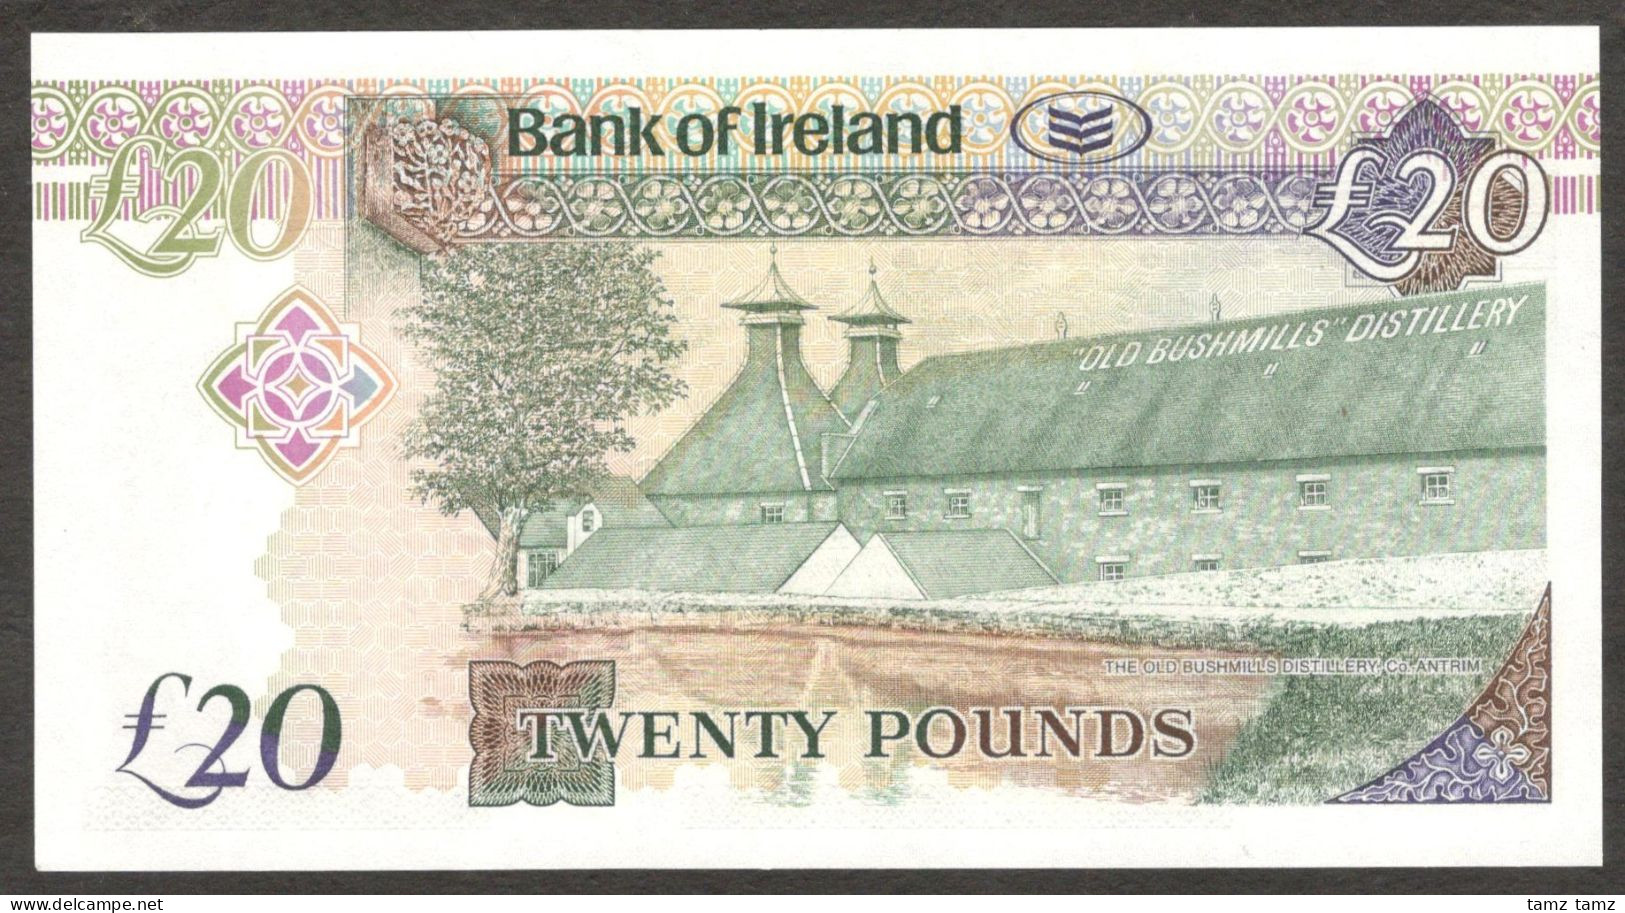 Ireland 20 Pounds Sterling 2008 P-85 Old Bushmills Distillery 2008 UNC Colorful - Irland